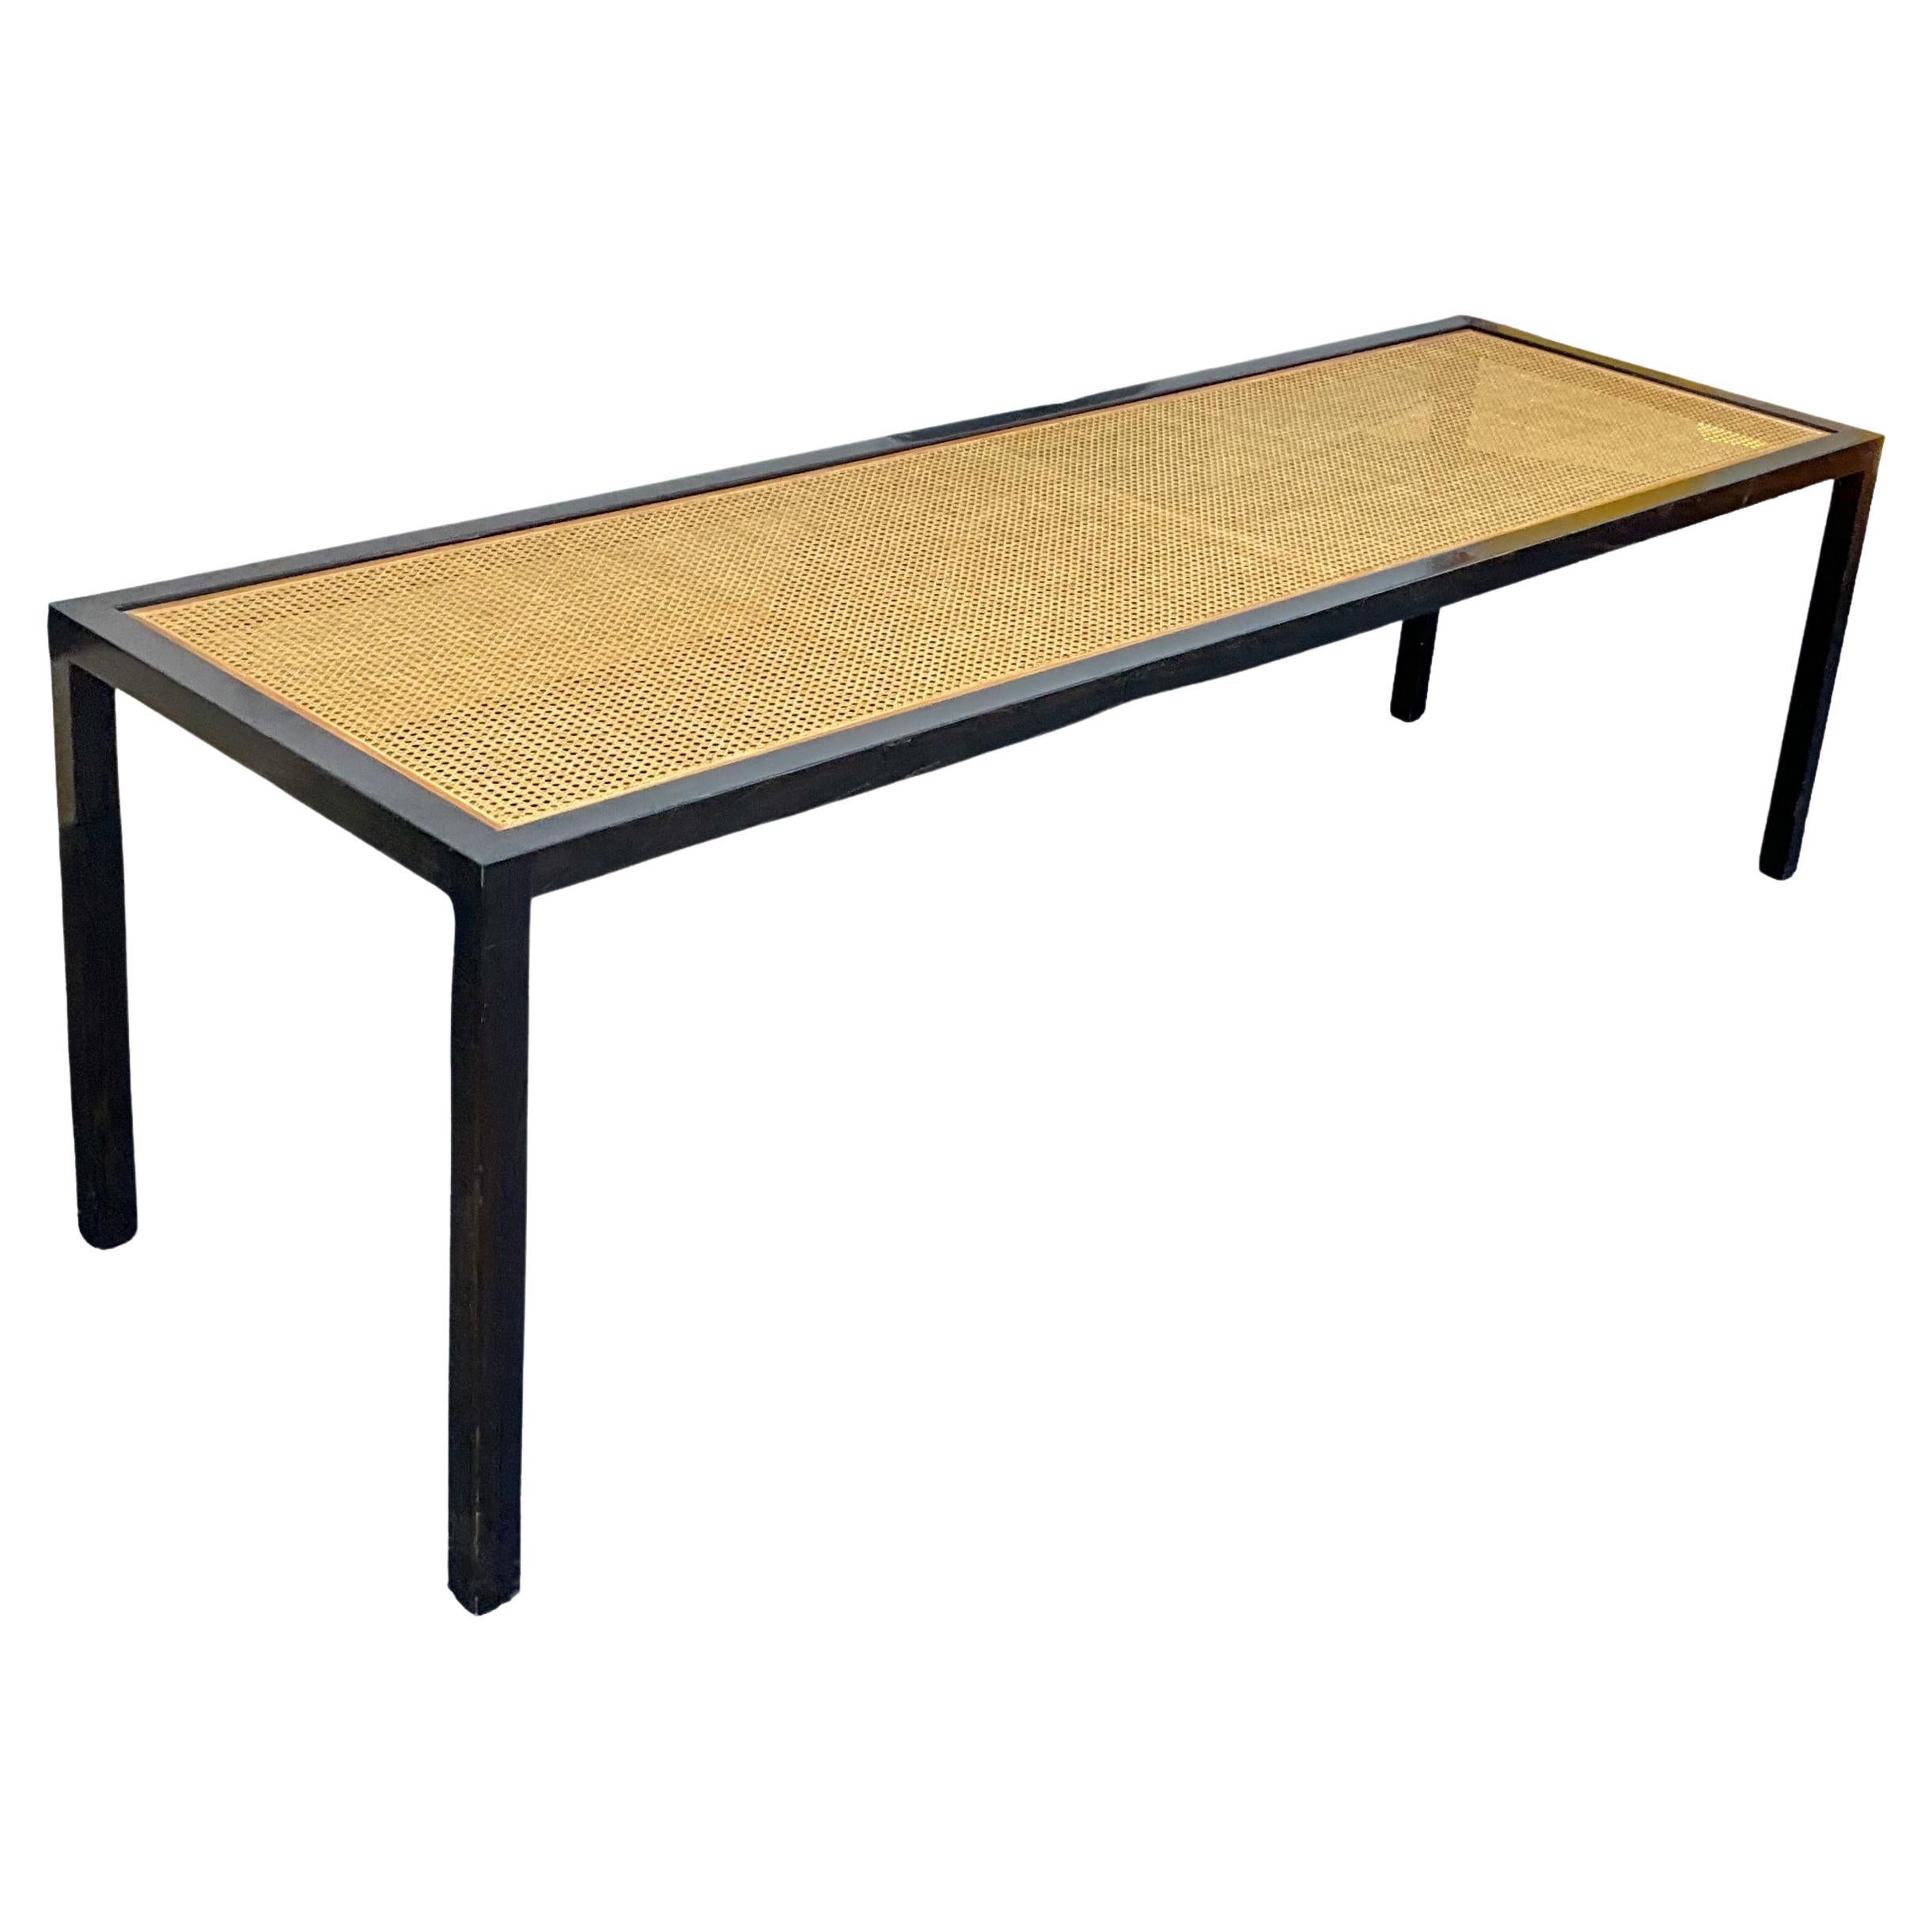 Organic Modern Glass & Cane Top Danny Ho Fong Style Dining Table / Desk  For Sale